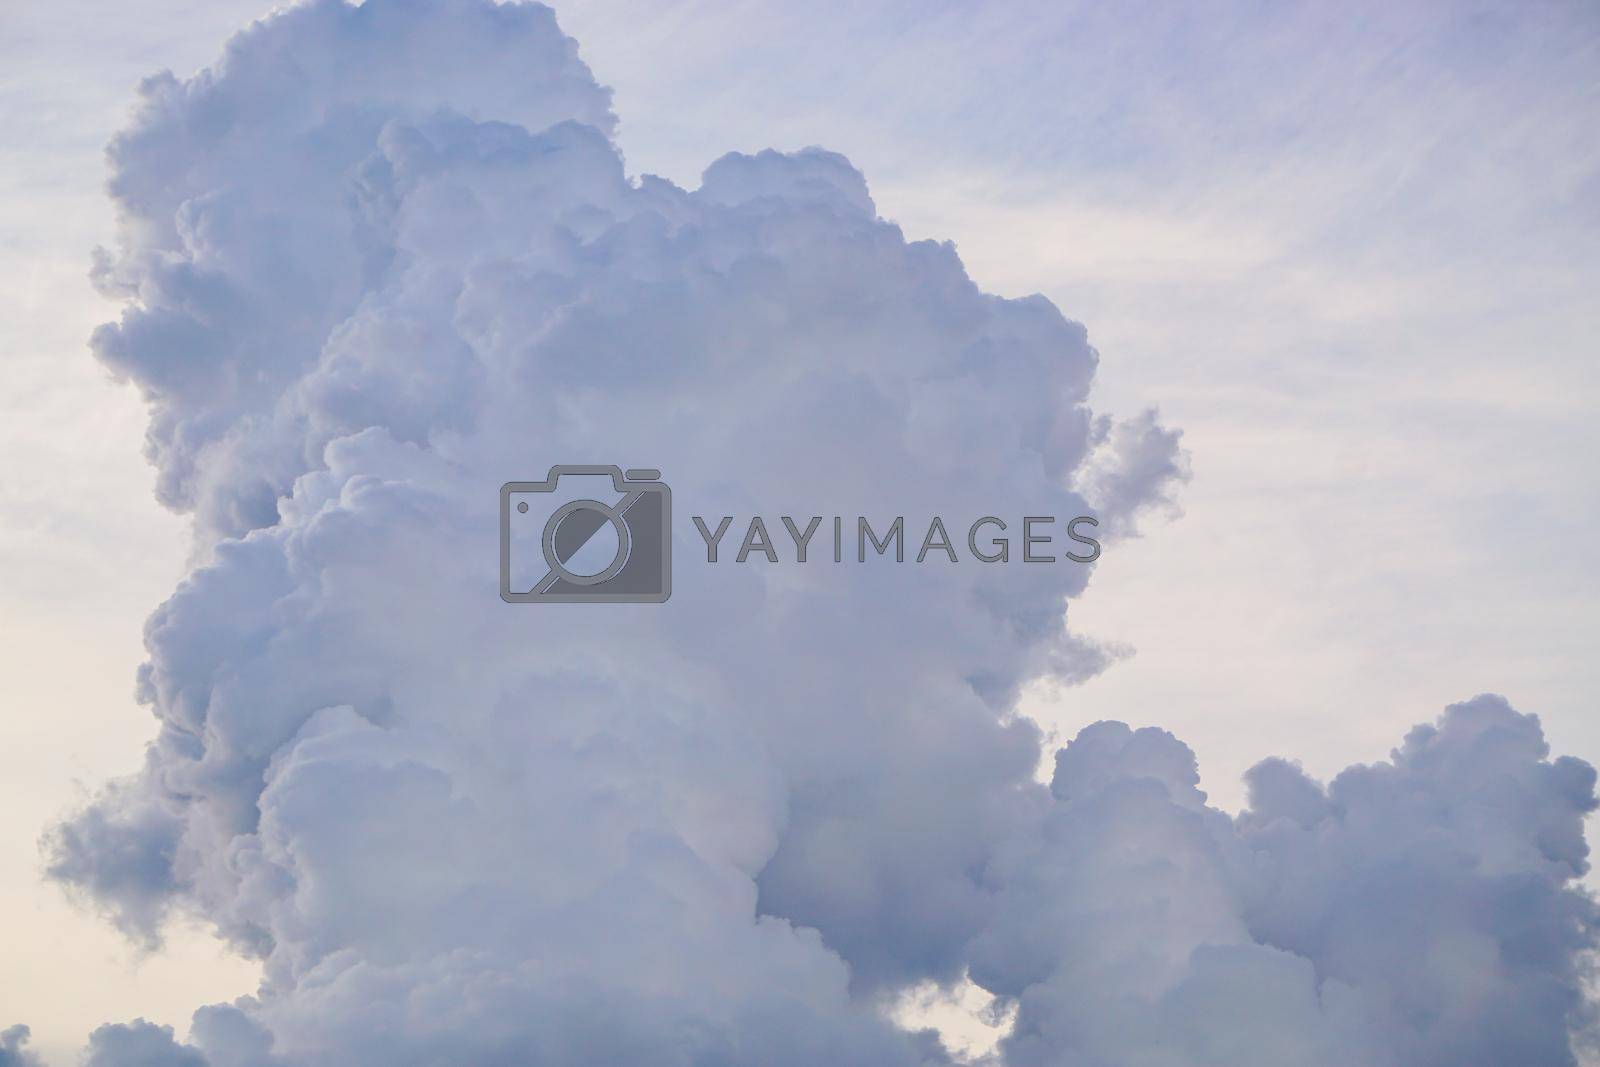 Royalty free image of Dark clouds cloudscape template background by tasci